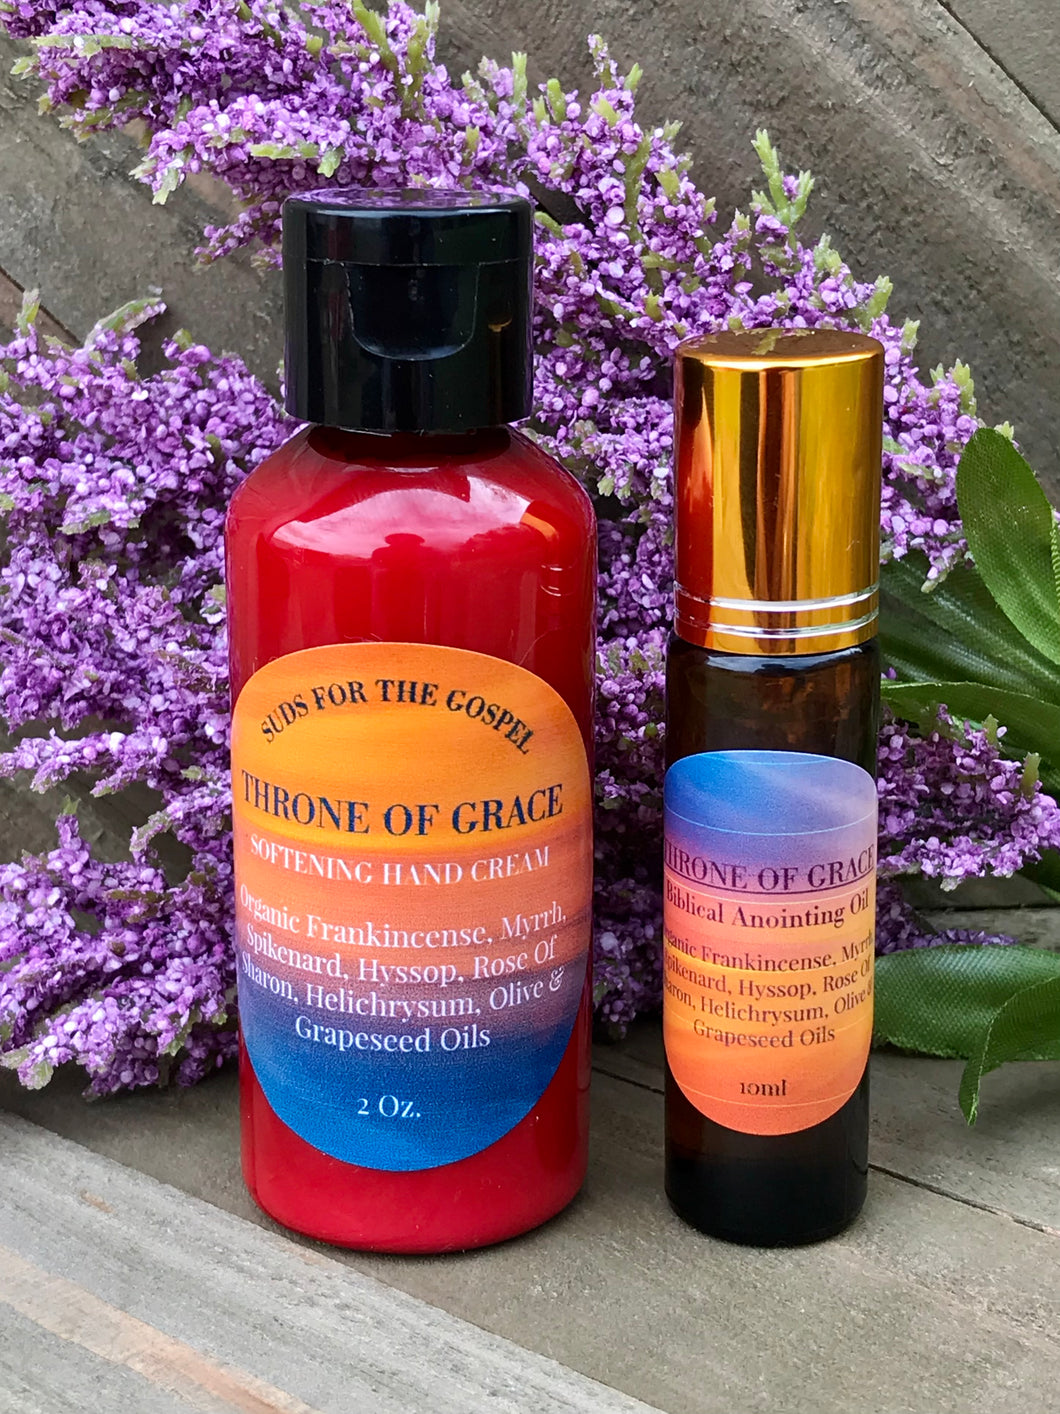 Throne of Grace Anointing Oil & Softening Hand Cream